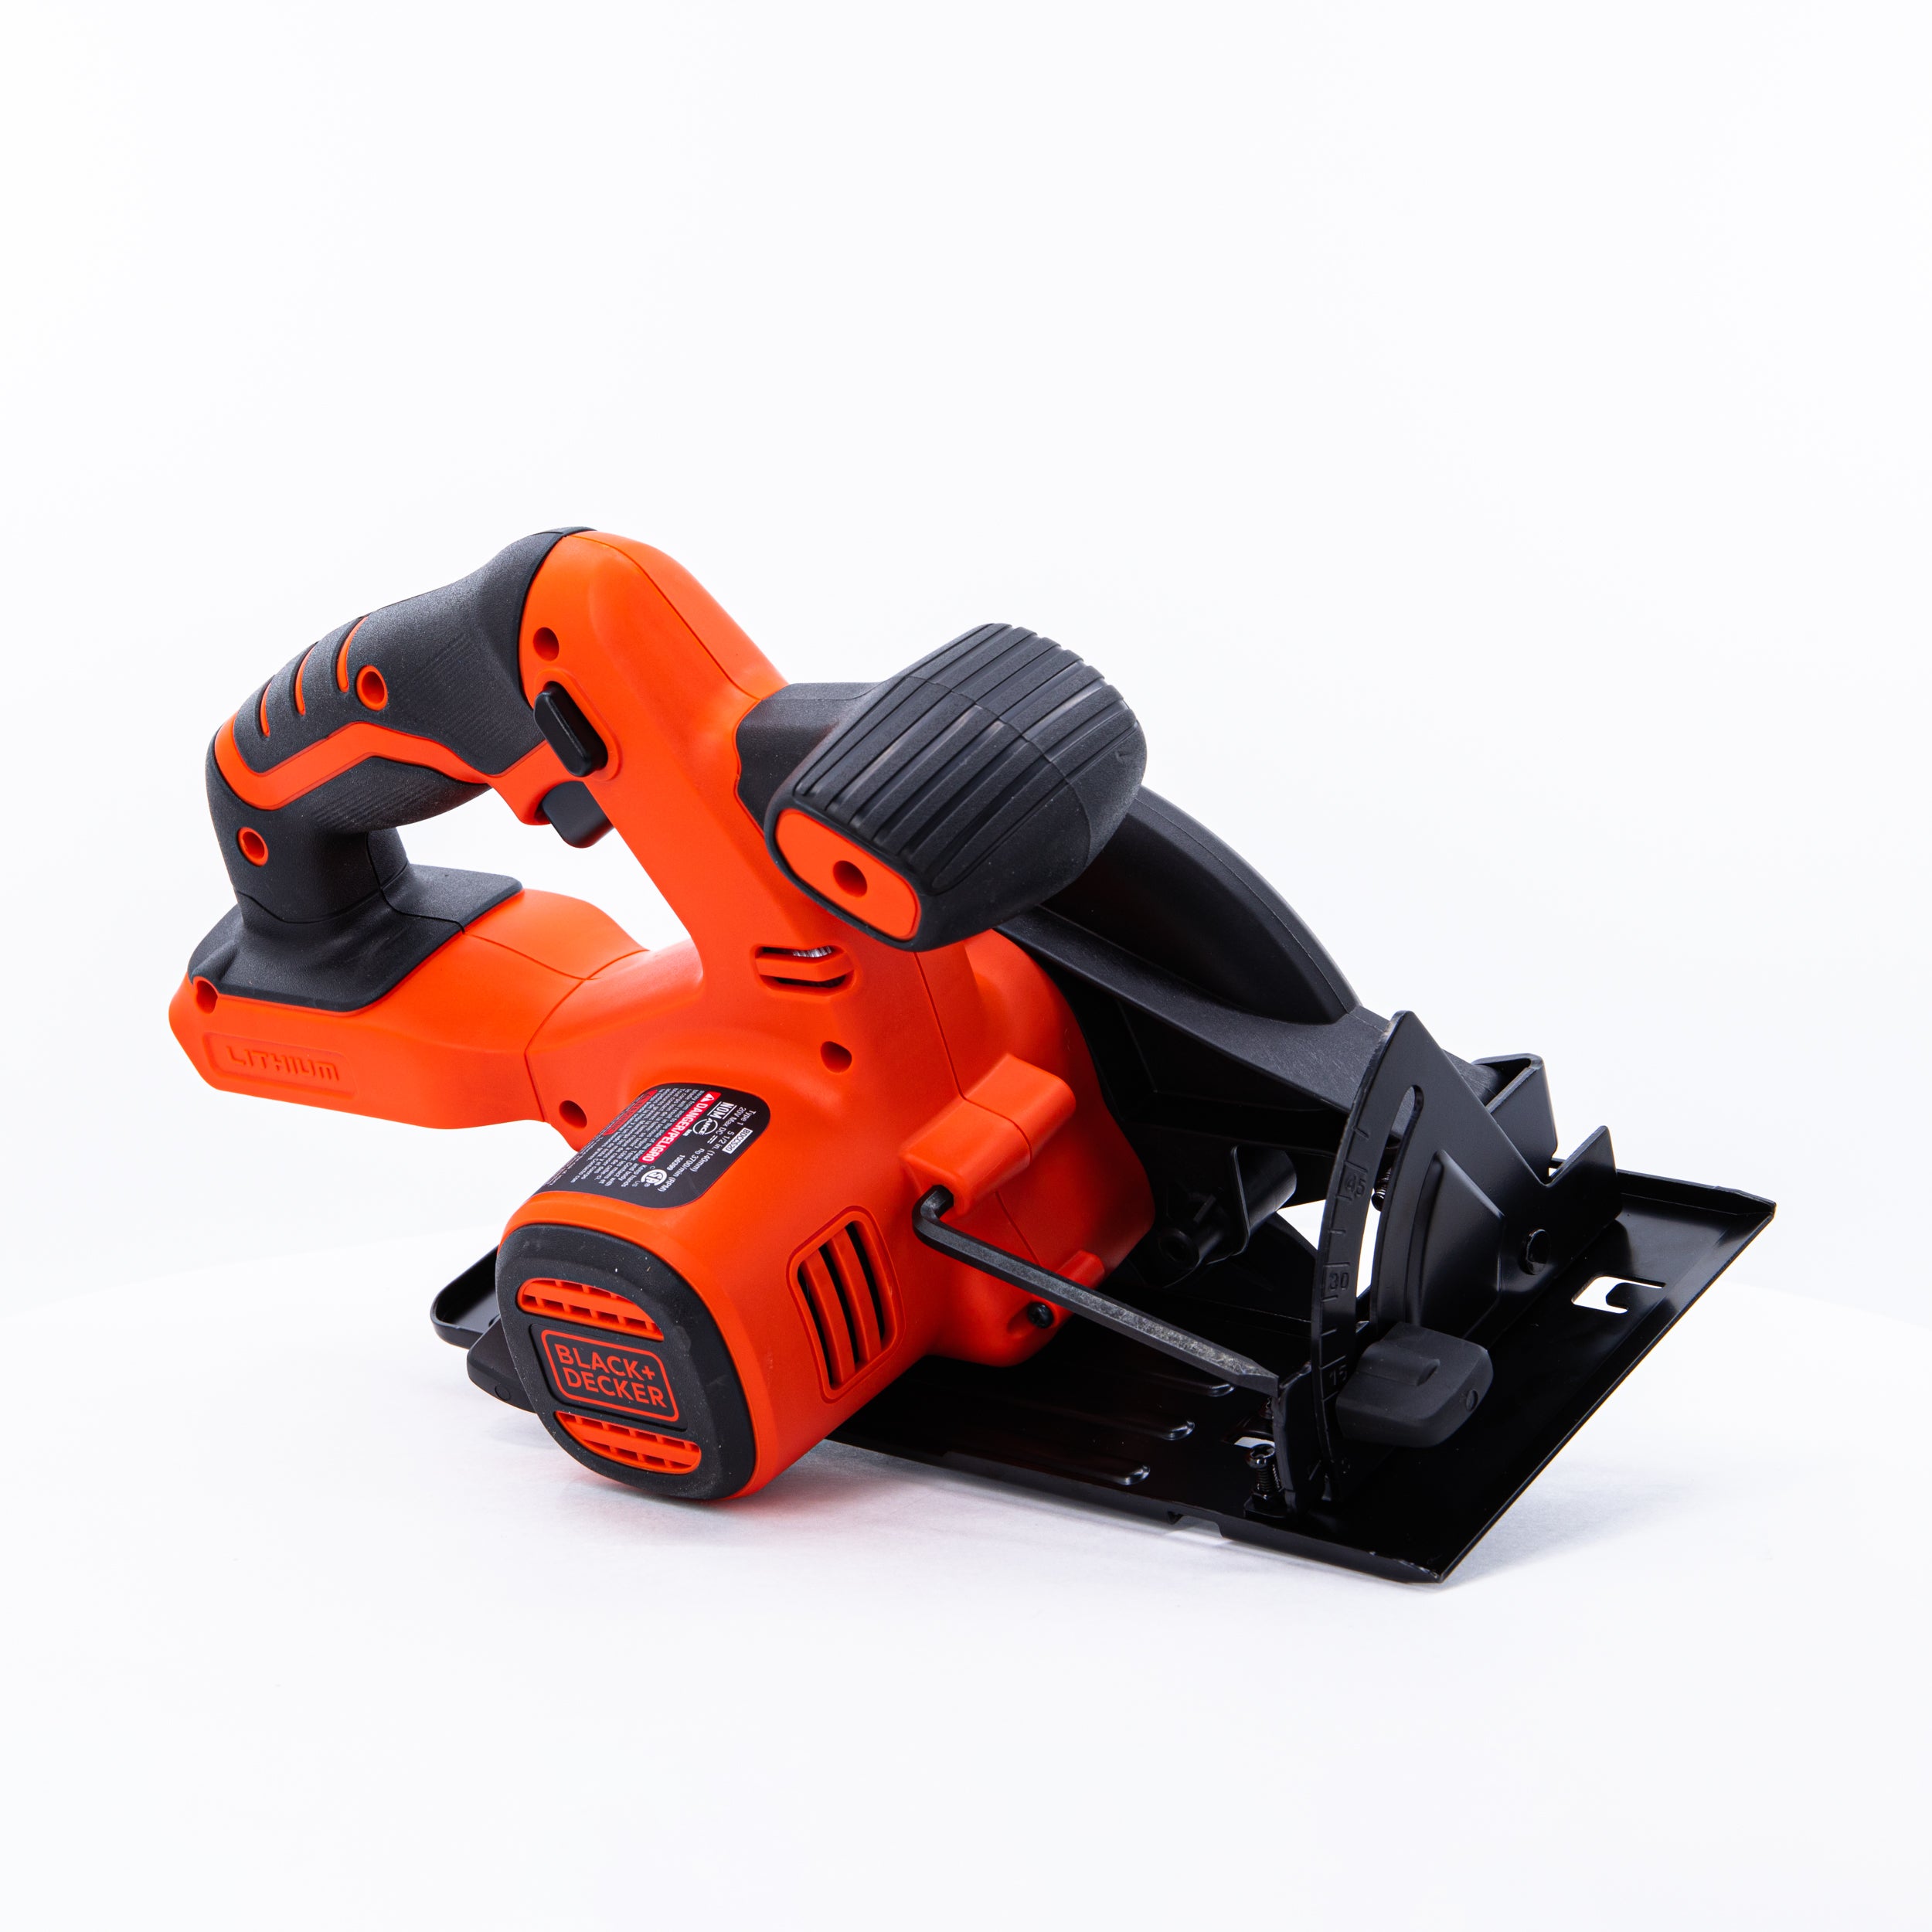 20V MAX* POWERCONNECT™ 5-1/2 in. Cordless Circular Saw, Tool Only |  BLACK+DECKER